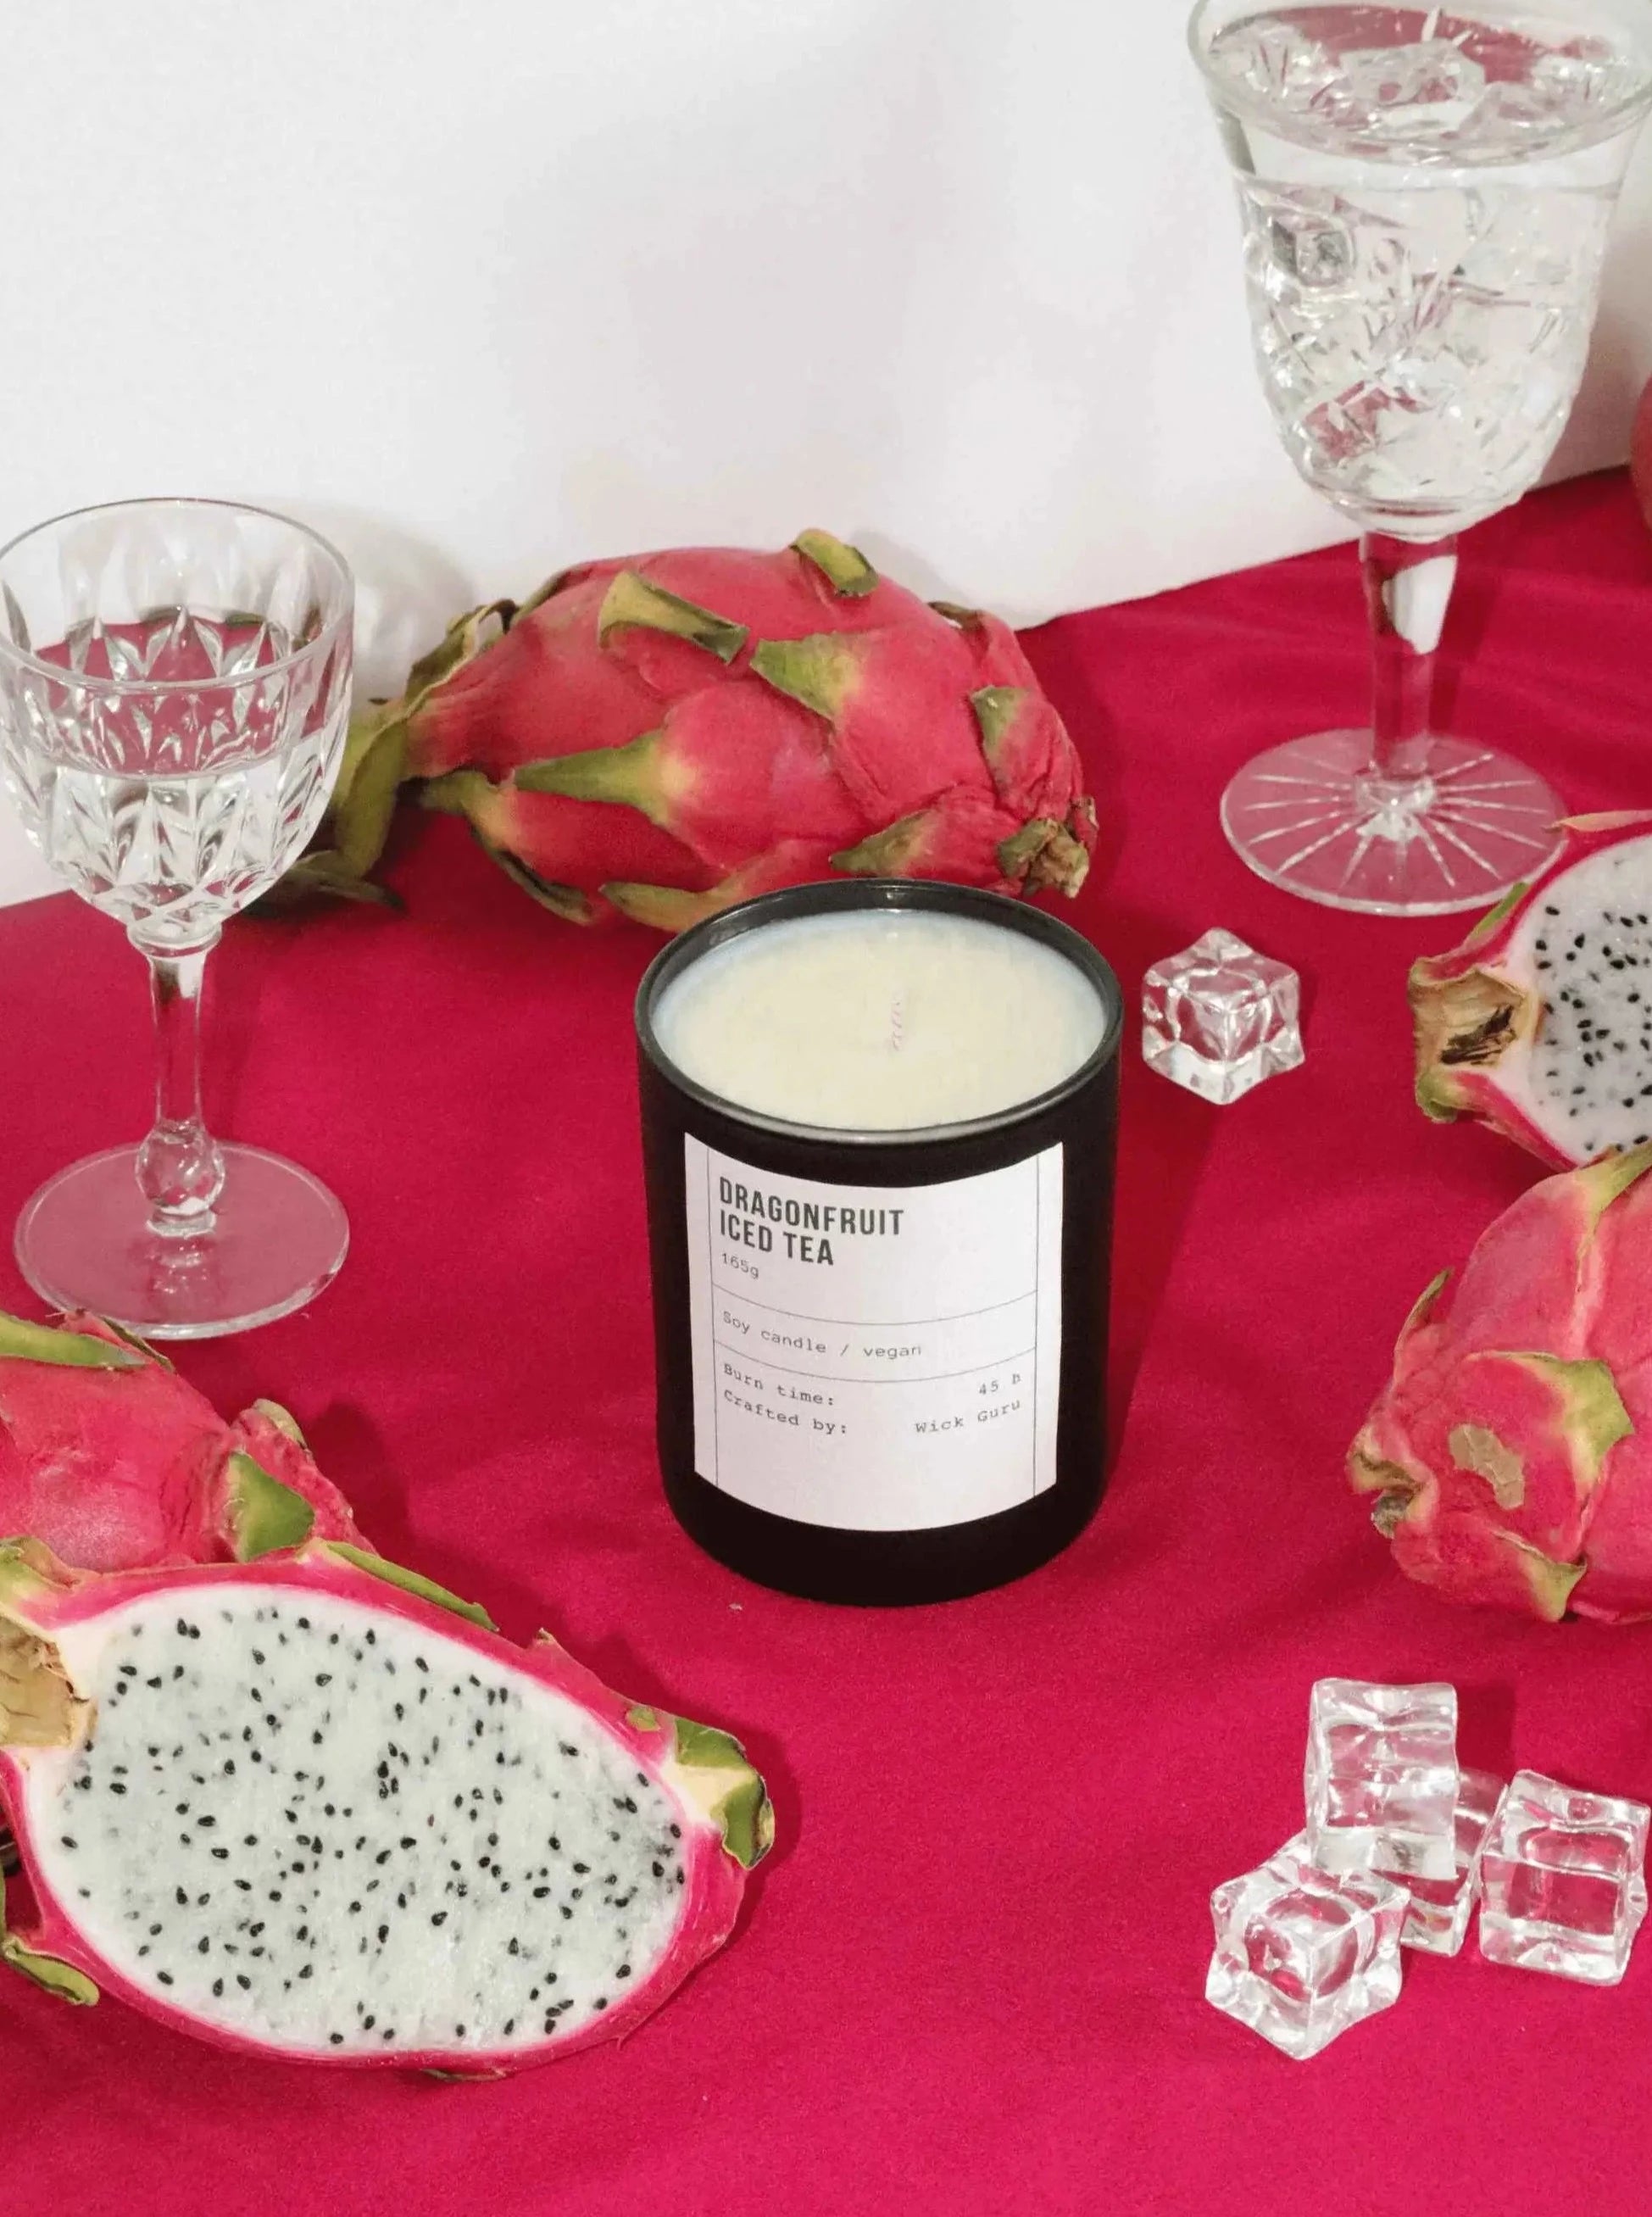 Dragonfruit Iced Tea Candle - A refreshing blend captured in a vibrant setting adorned with dragonfruits and peaches